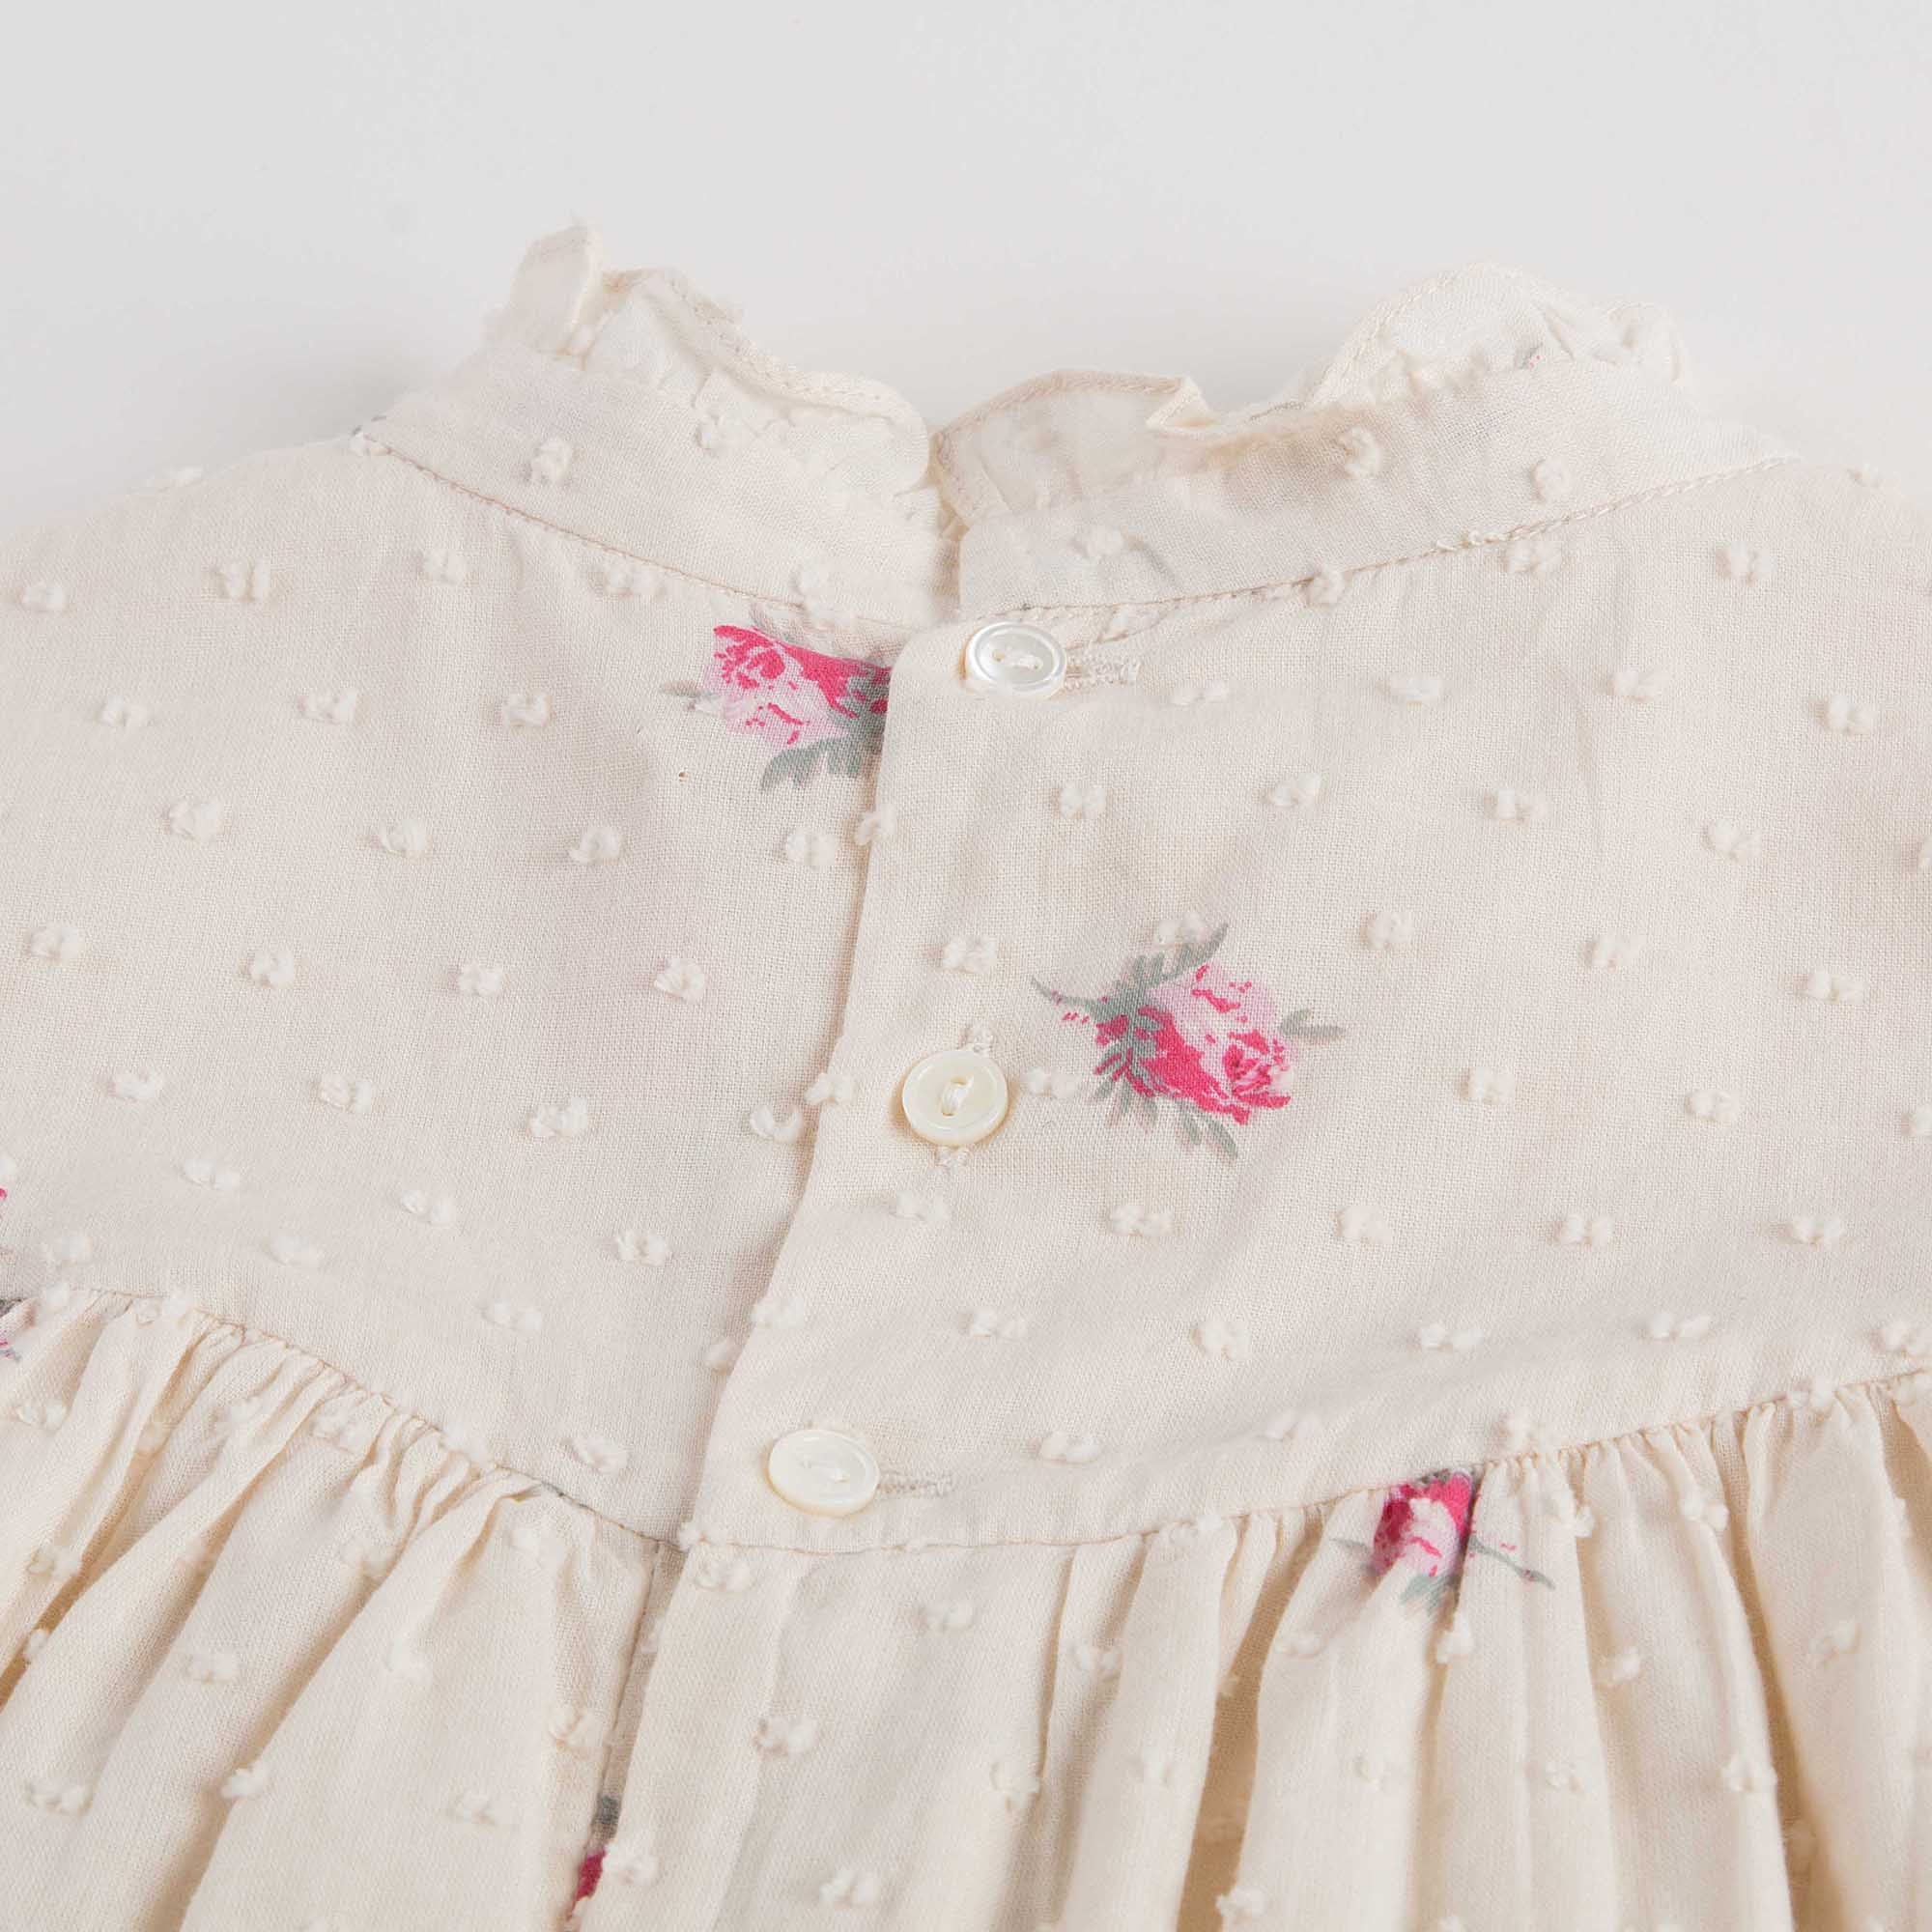 Girls Lvory With Pink Flowers Dresses - CÉMAROSE | Children's Fashion Store - 7